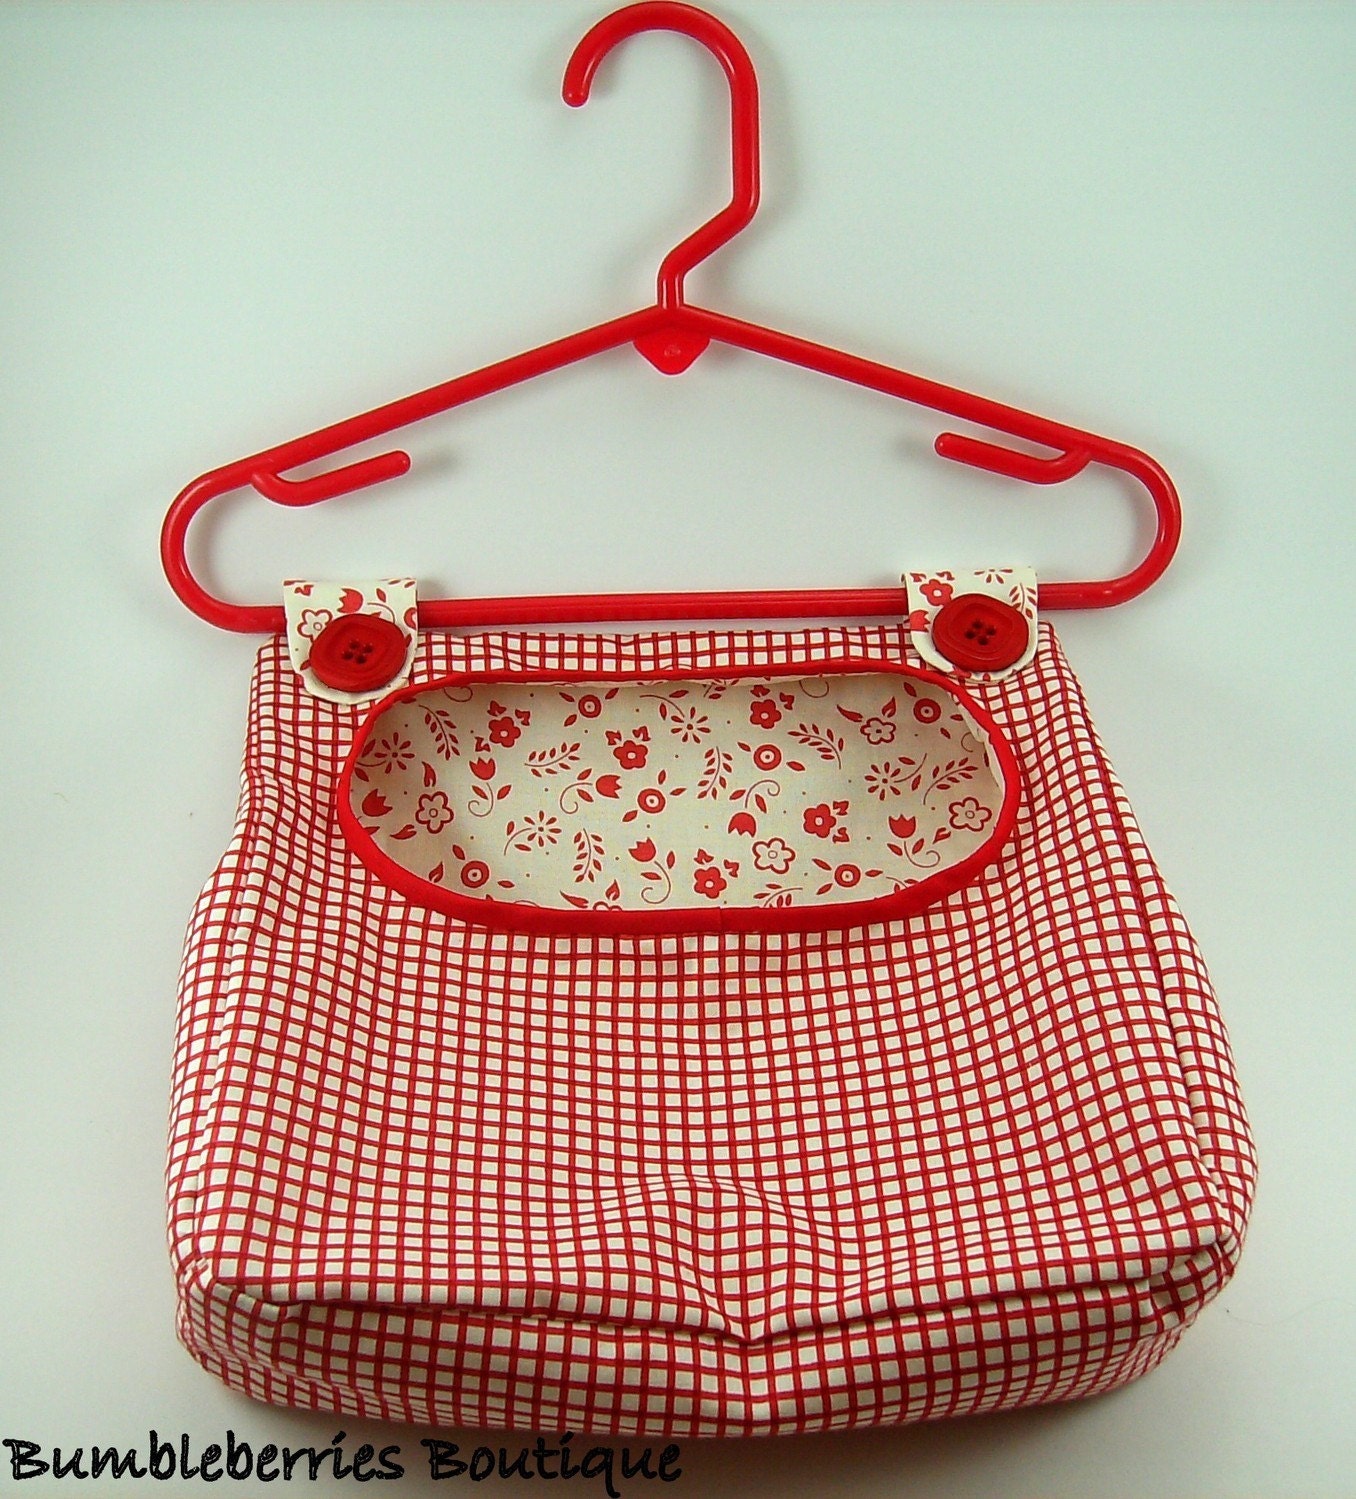 Cheap luggage sets in uk, clothespin holder bag pattern